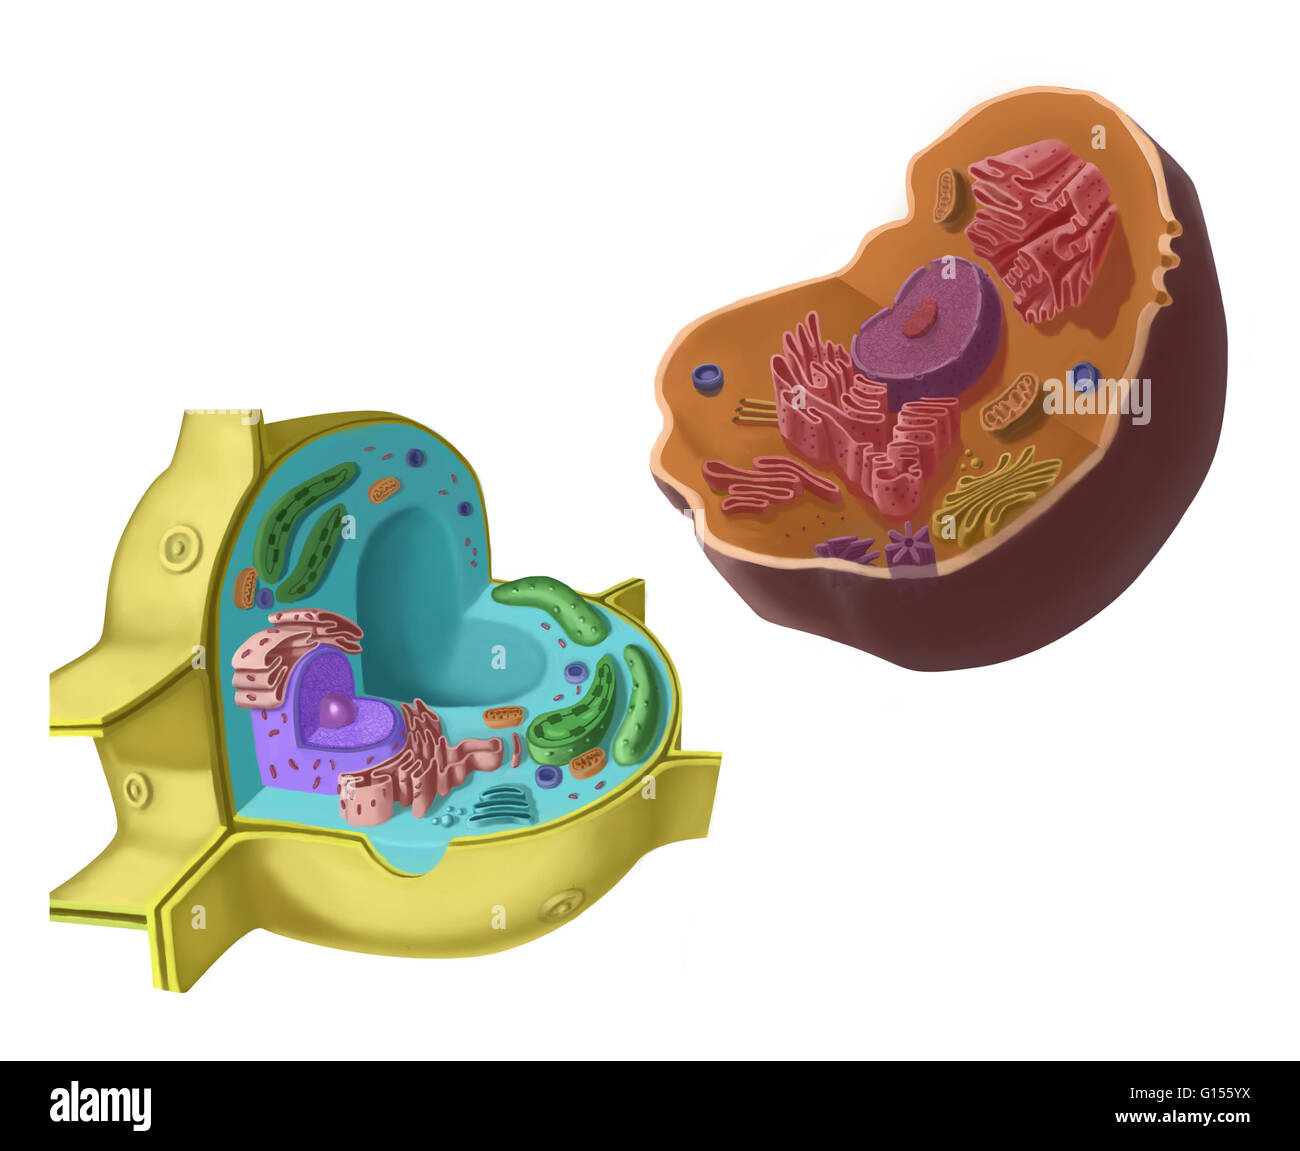 Comparison of a plant cell on the left and an animal cell on the right. Stock Photo